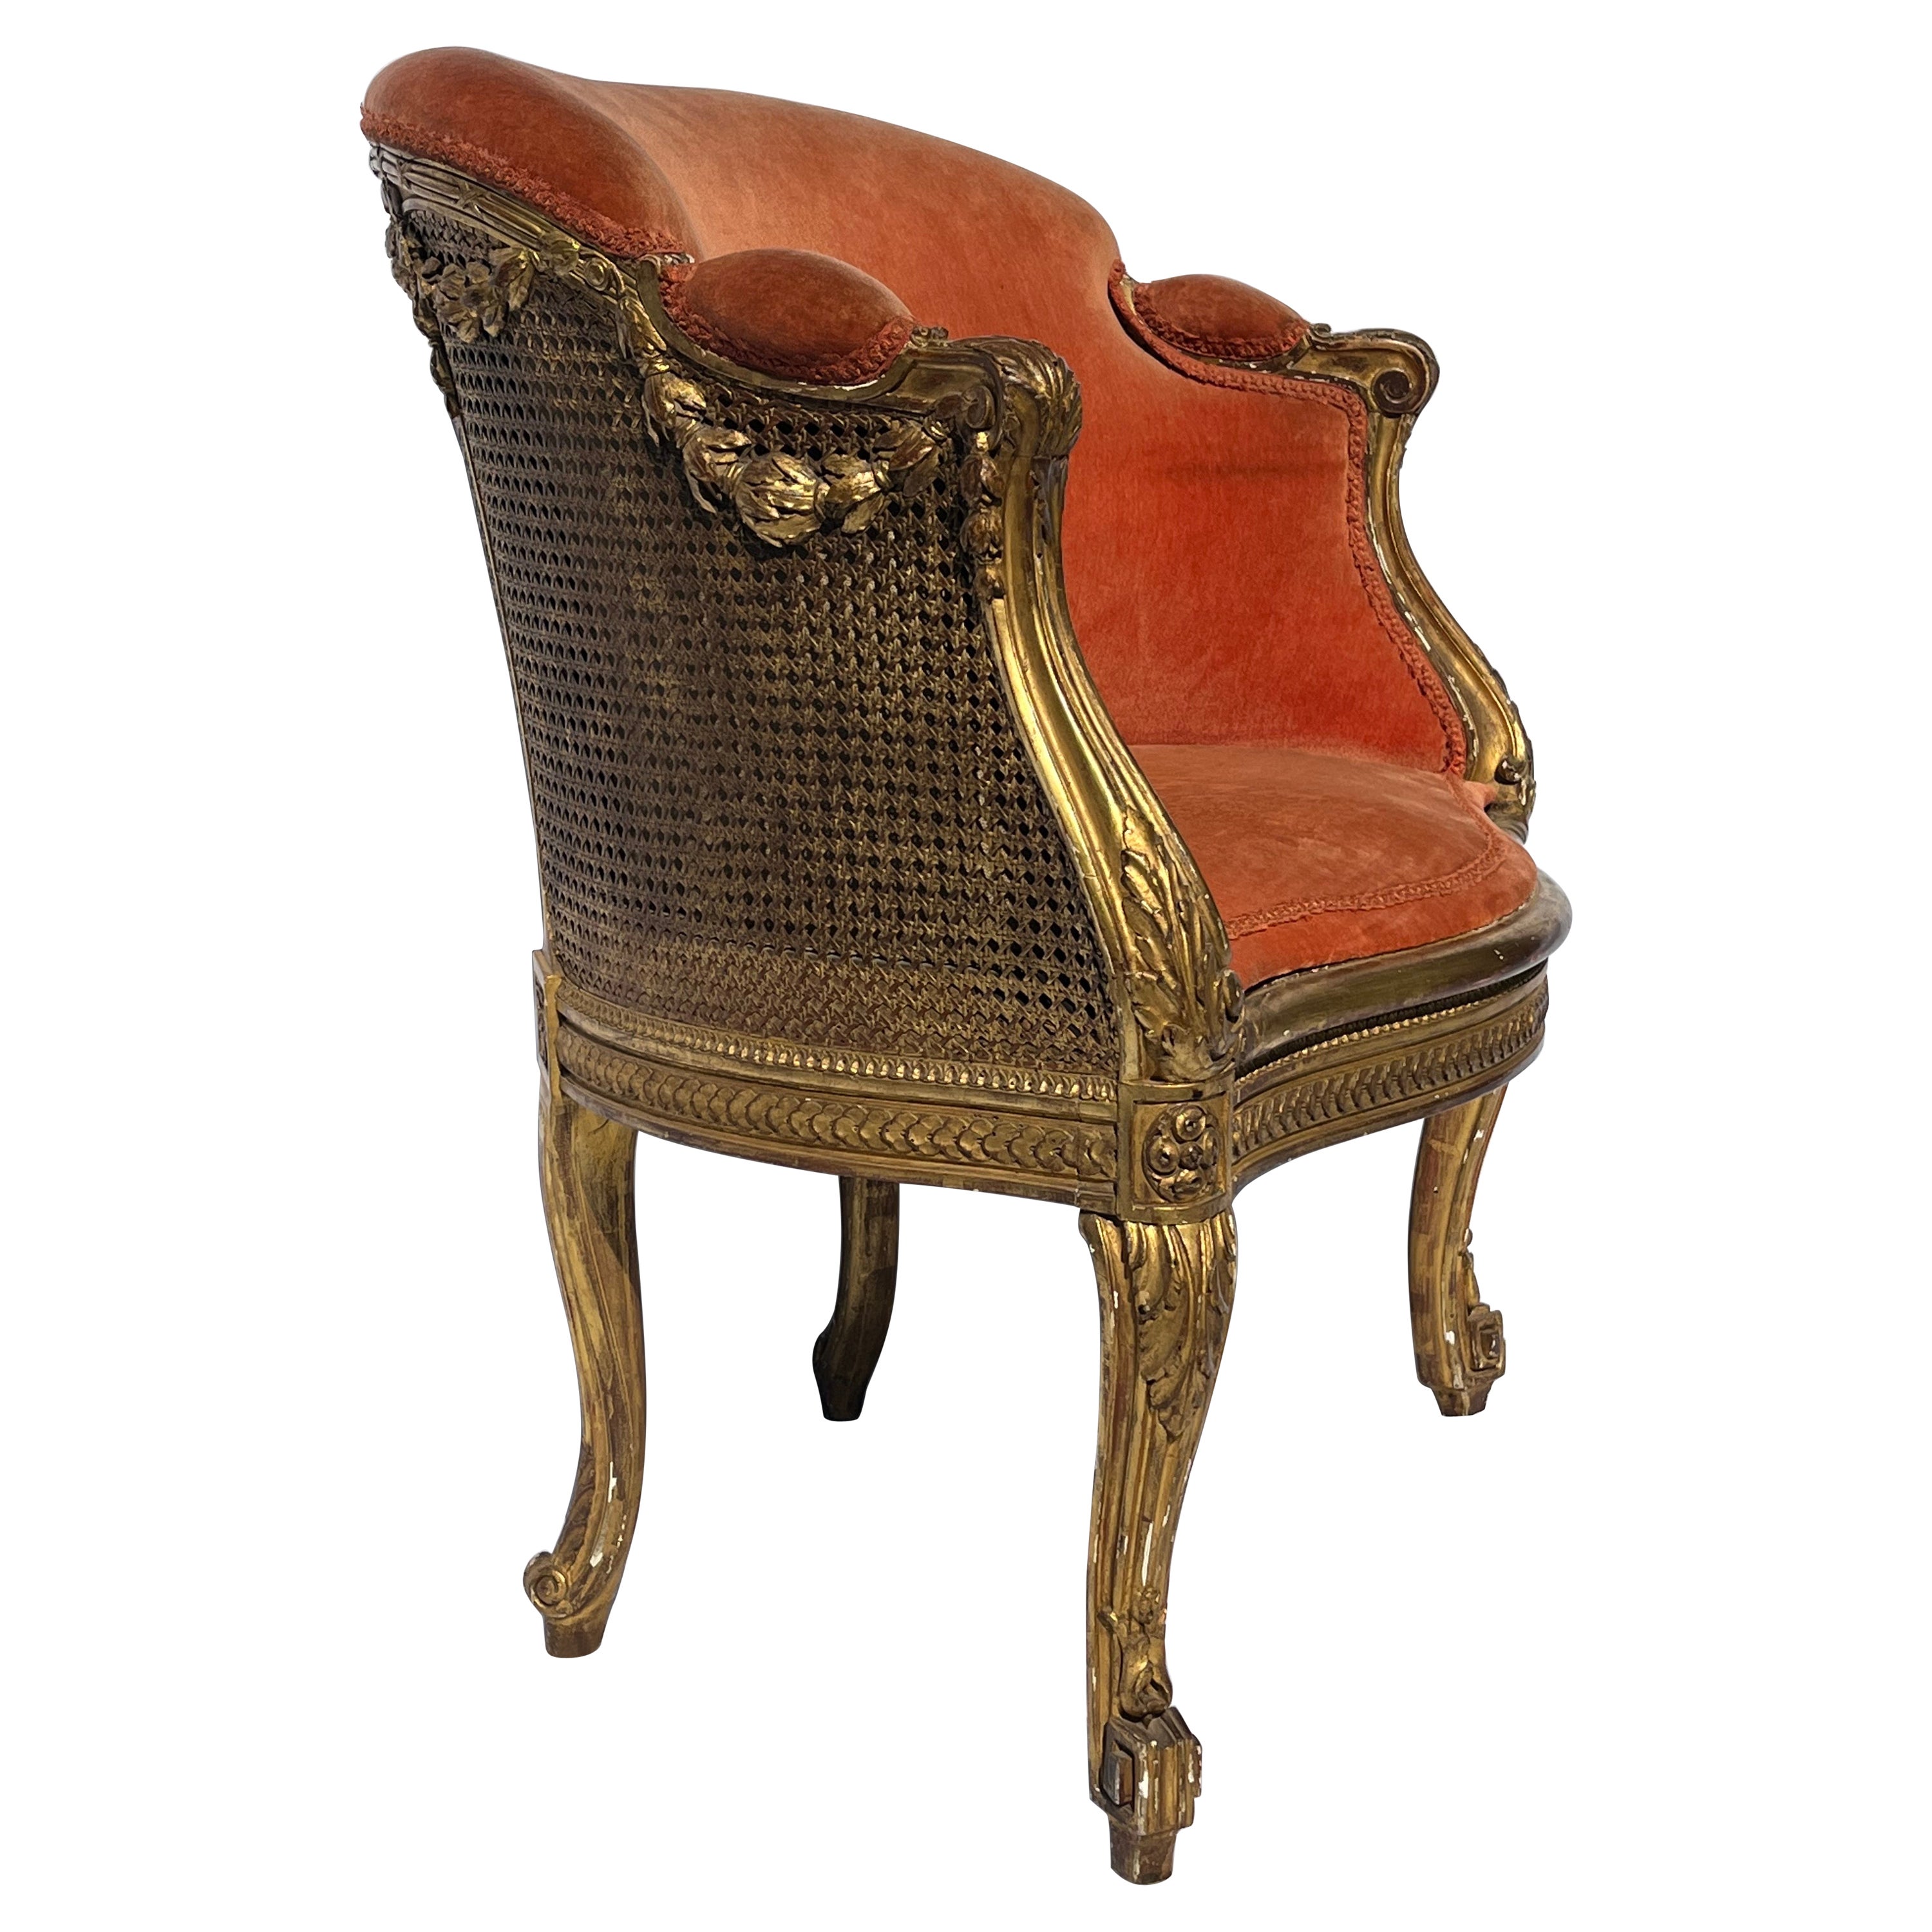 Antique French Gilt and Carved 19th Century Cane Upholstered Bergere Armchair For Sale